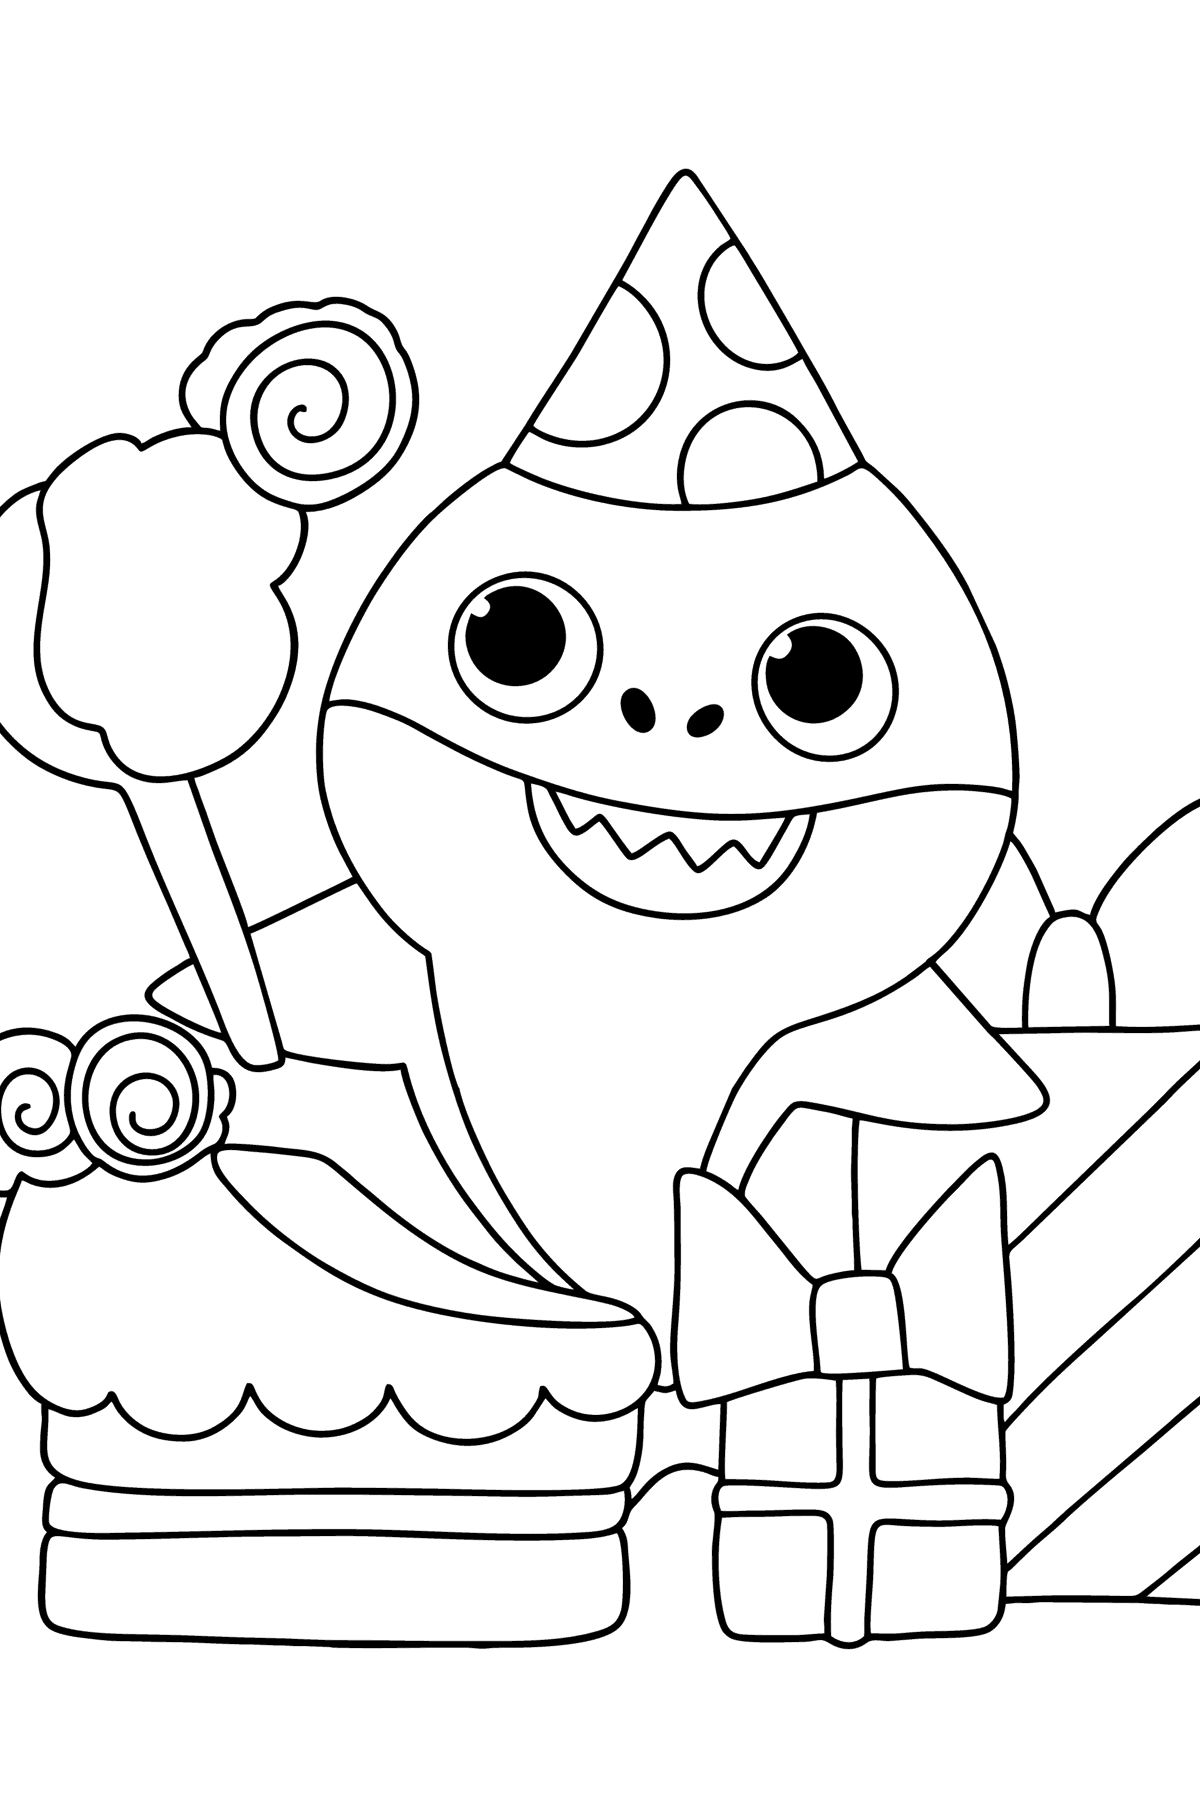 Cake for Baby shark coloring page - Coloring Pages for Kids